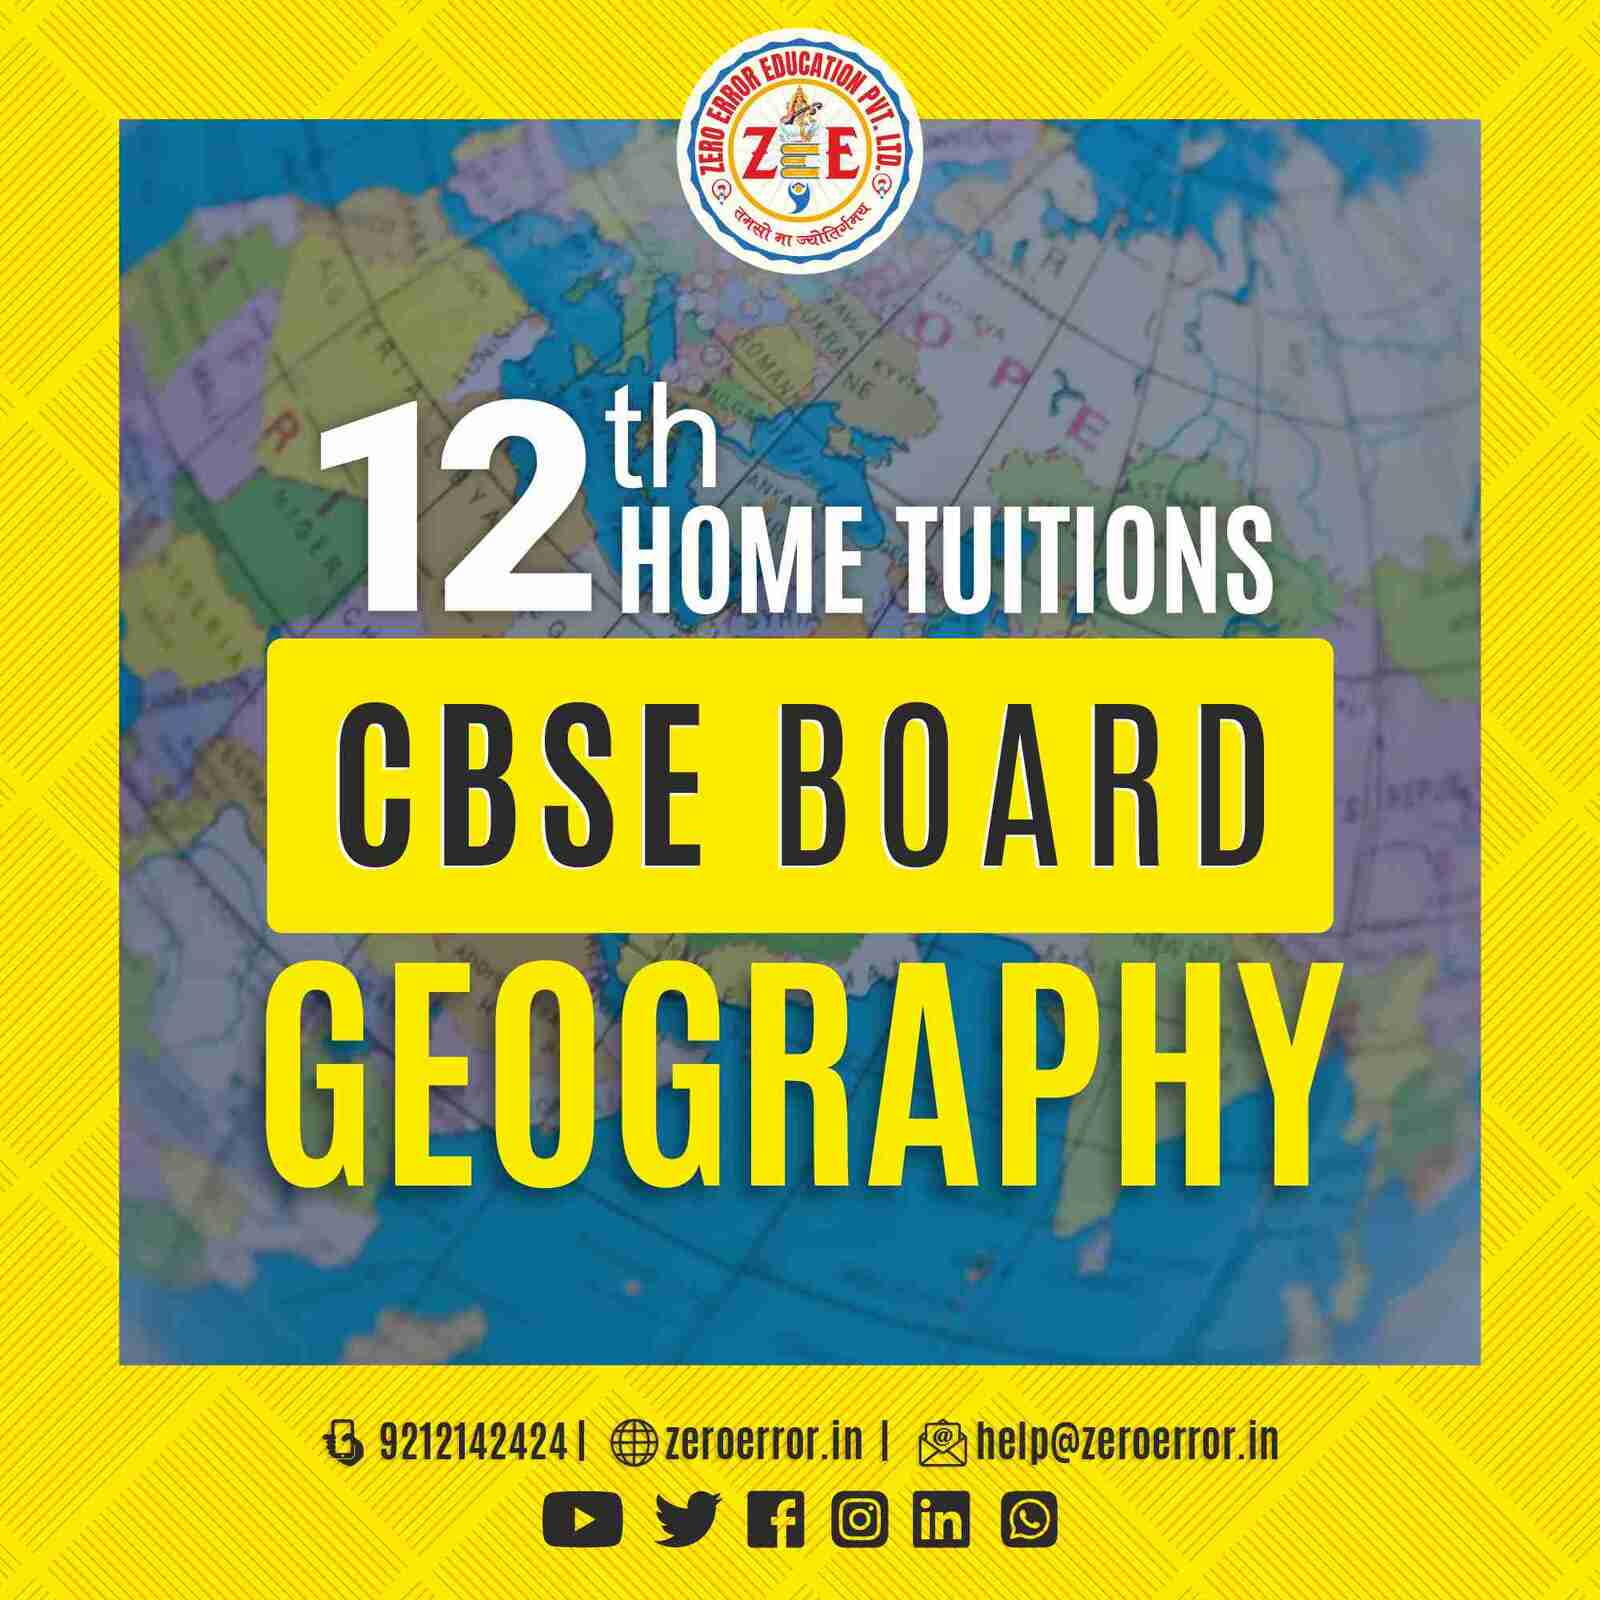 12th Grade CBSE Geography Online Classes by Zero Error Education Prepare for your CBSE board exams with online and offline Geography classes for 12th grade. Learn from experienced home tutors and get all the help you need to succeed. Enroll today at Zero Error Education. [https://zeroerror.in/] Call 9212142424 for more information.